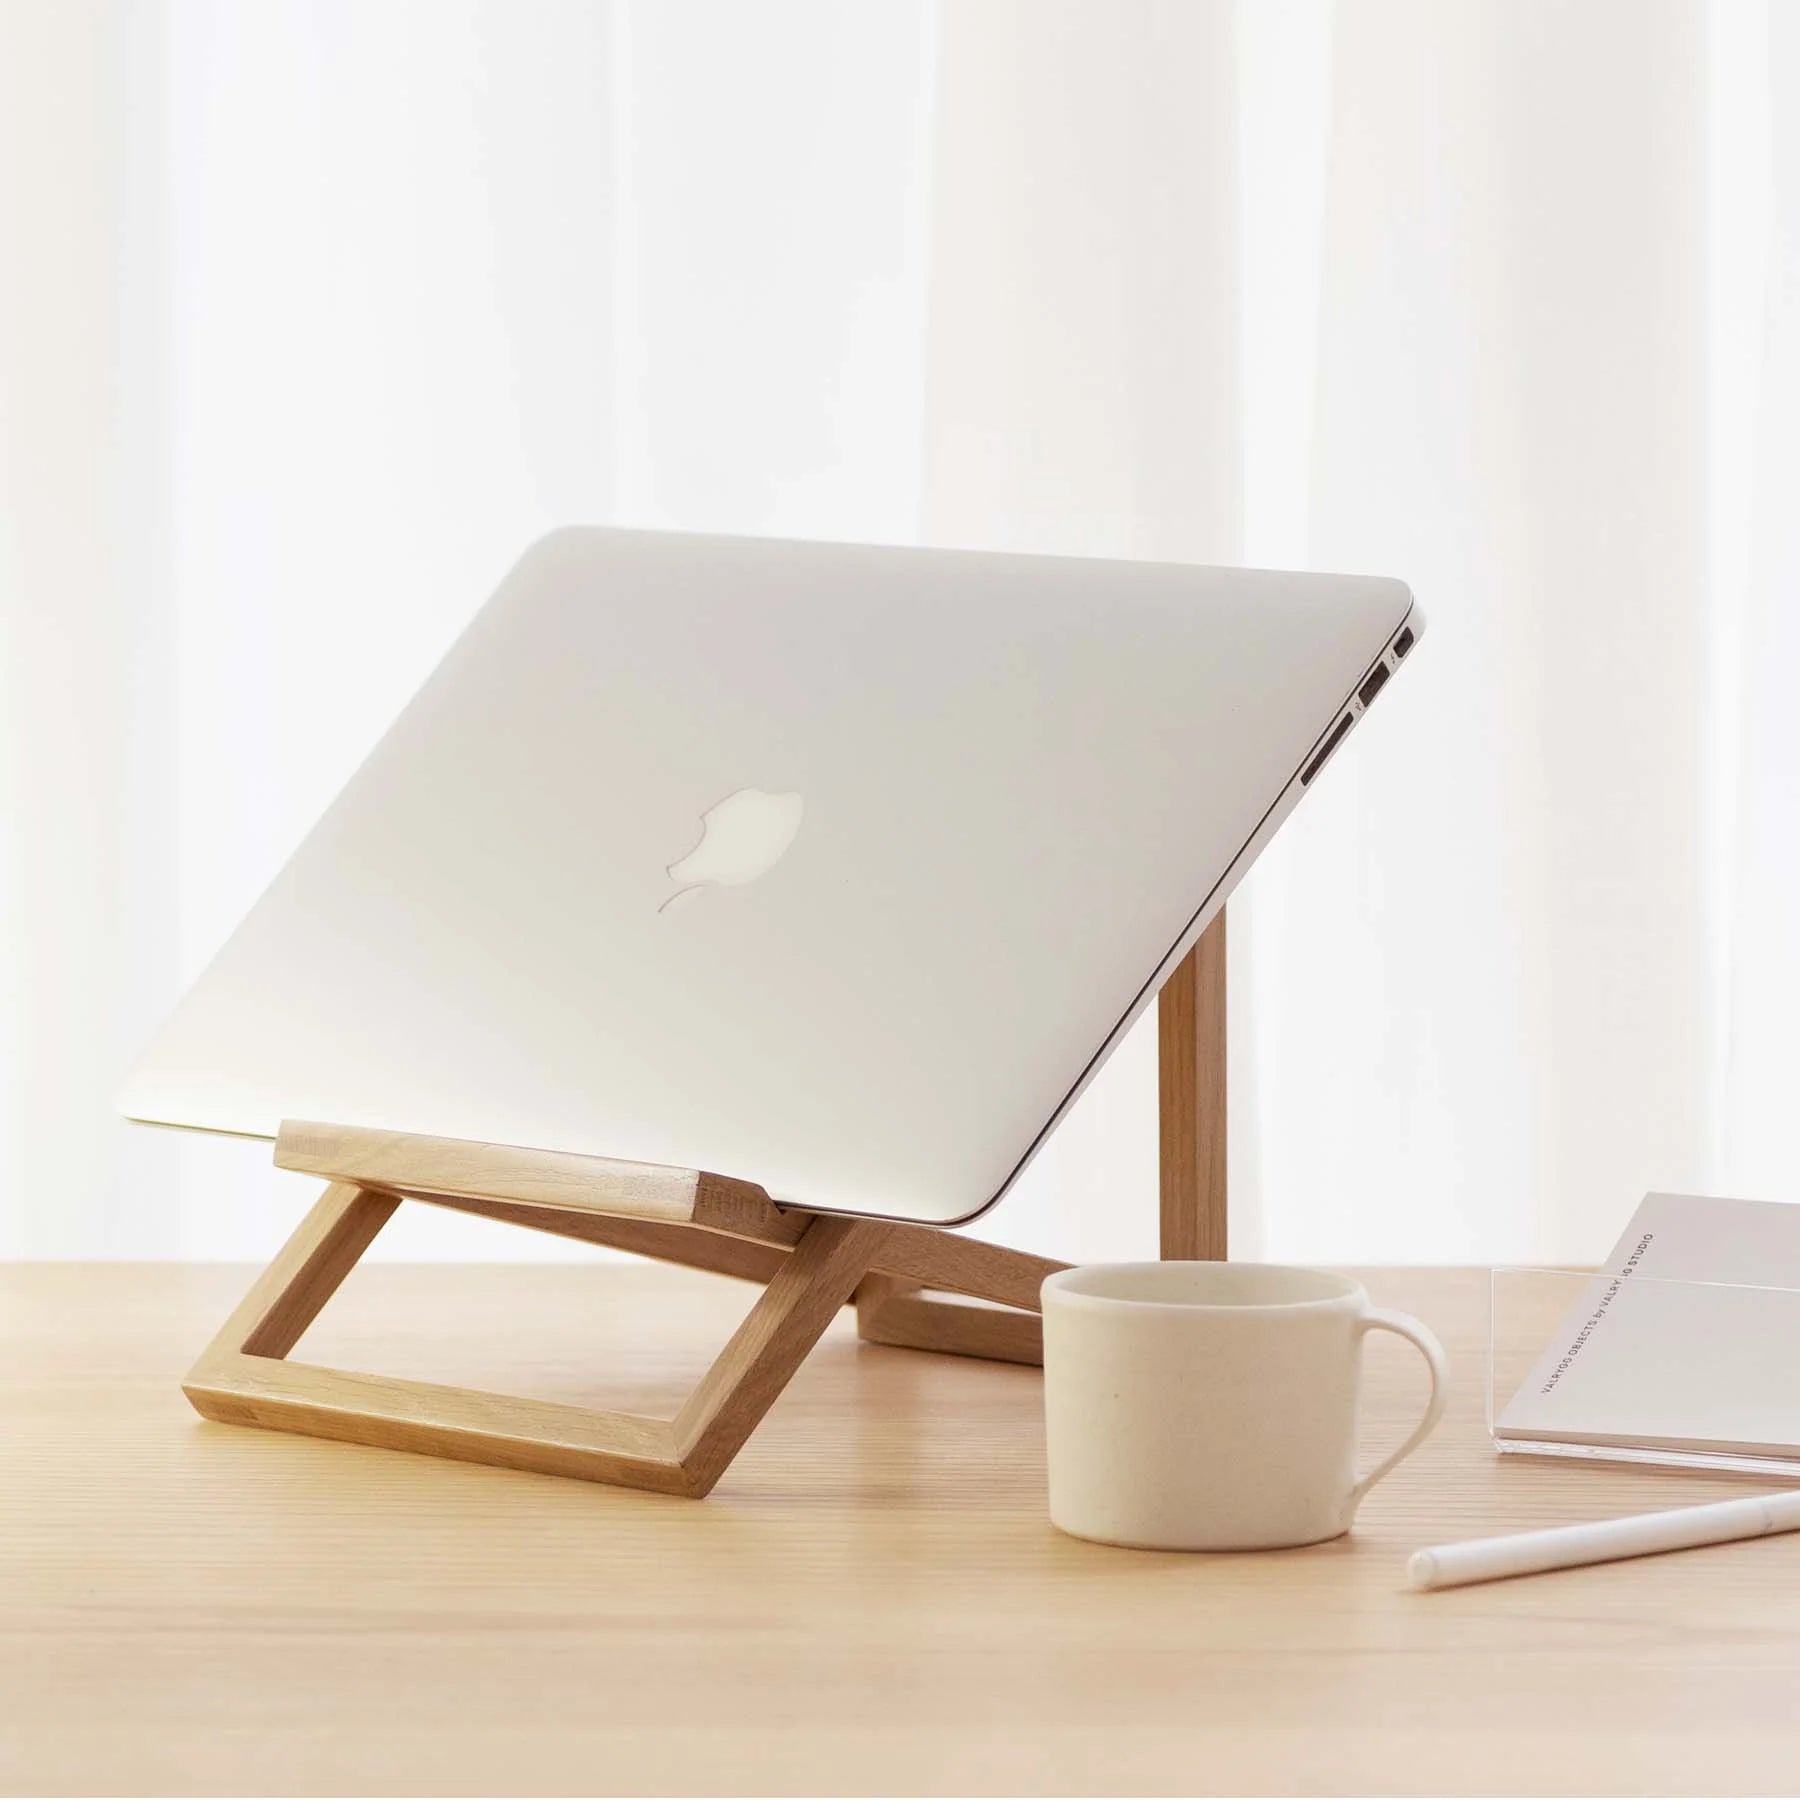 Elevate Your Work Life with Standing: The Innovative Foldable Laptop Stand